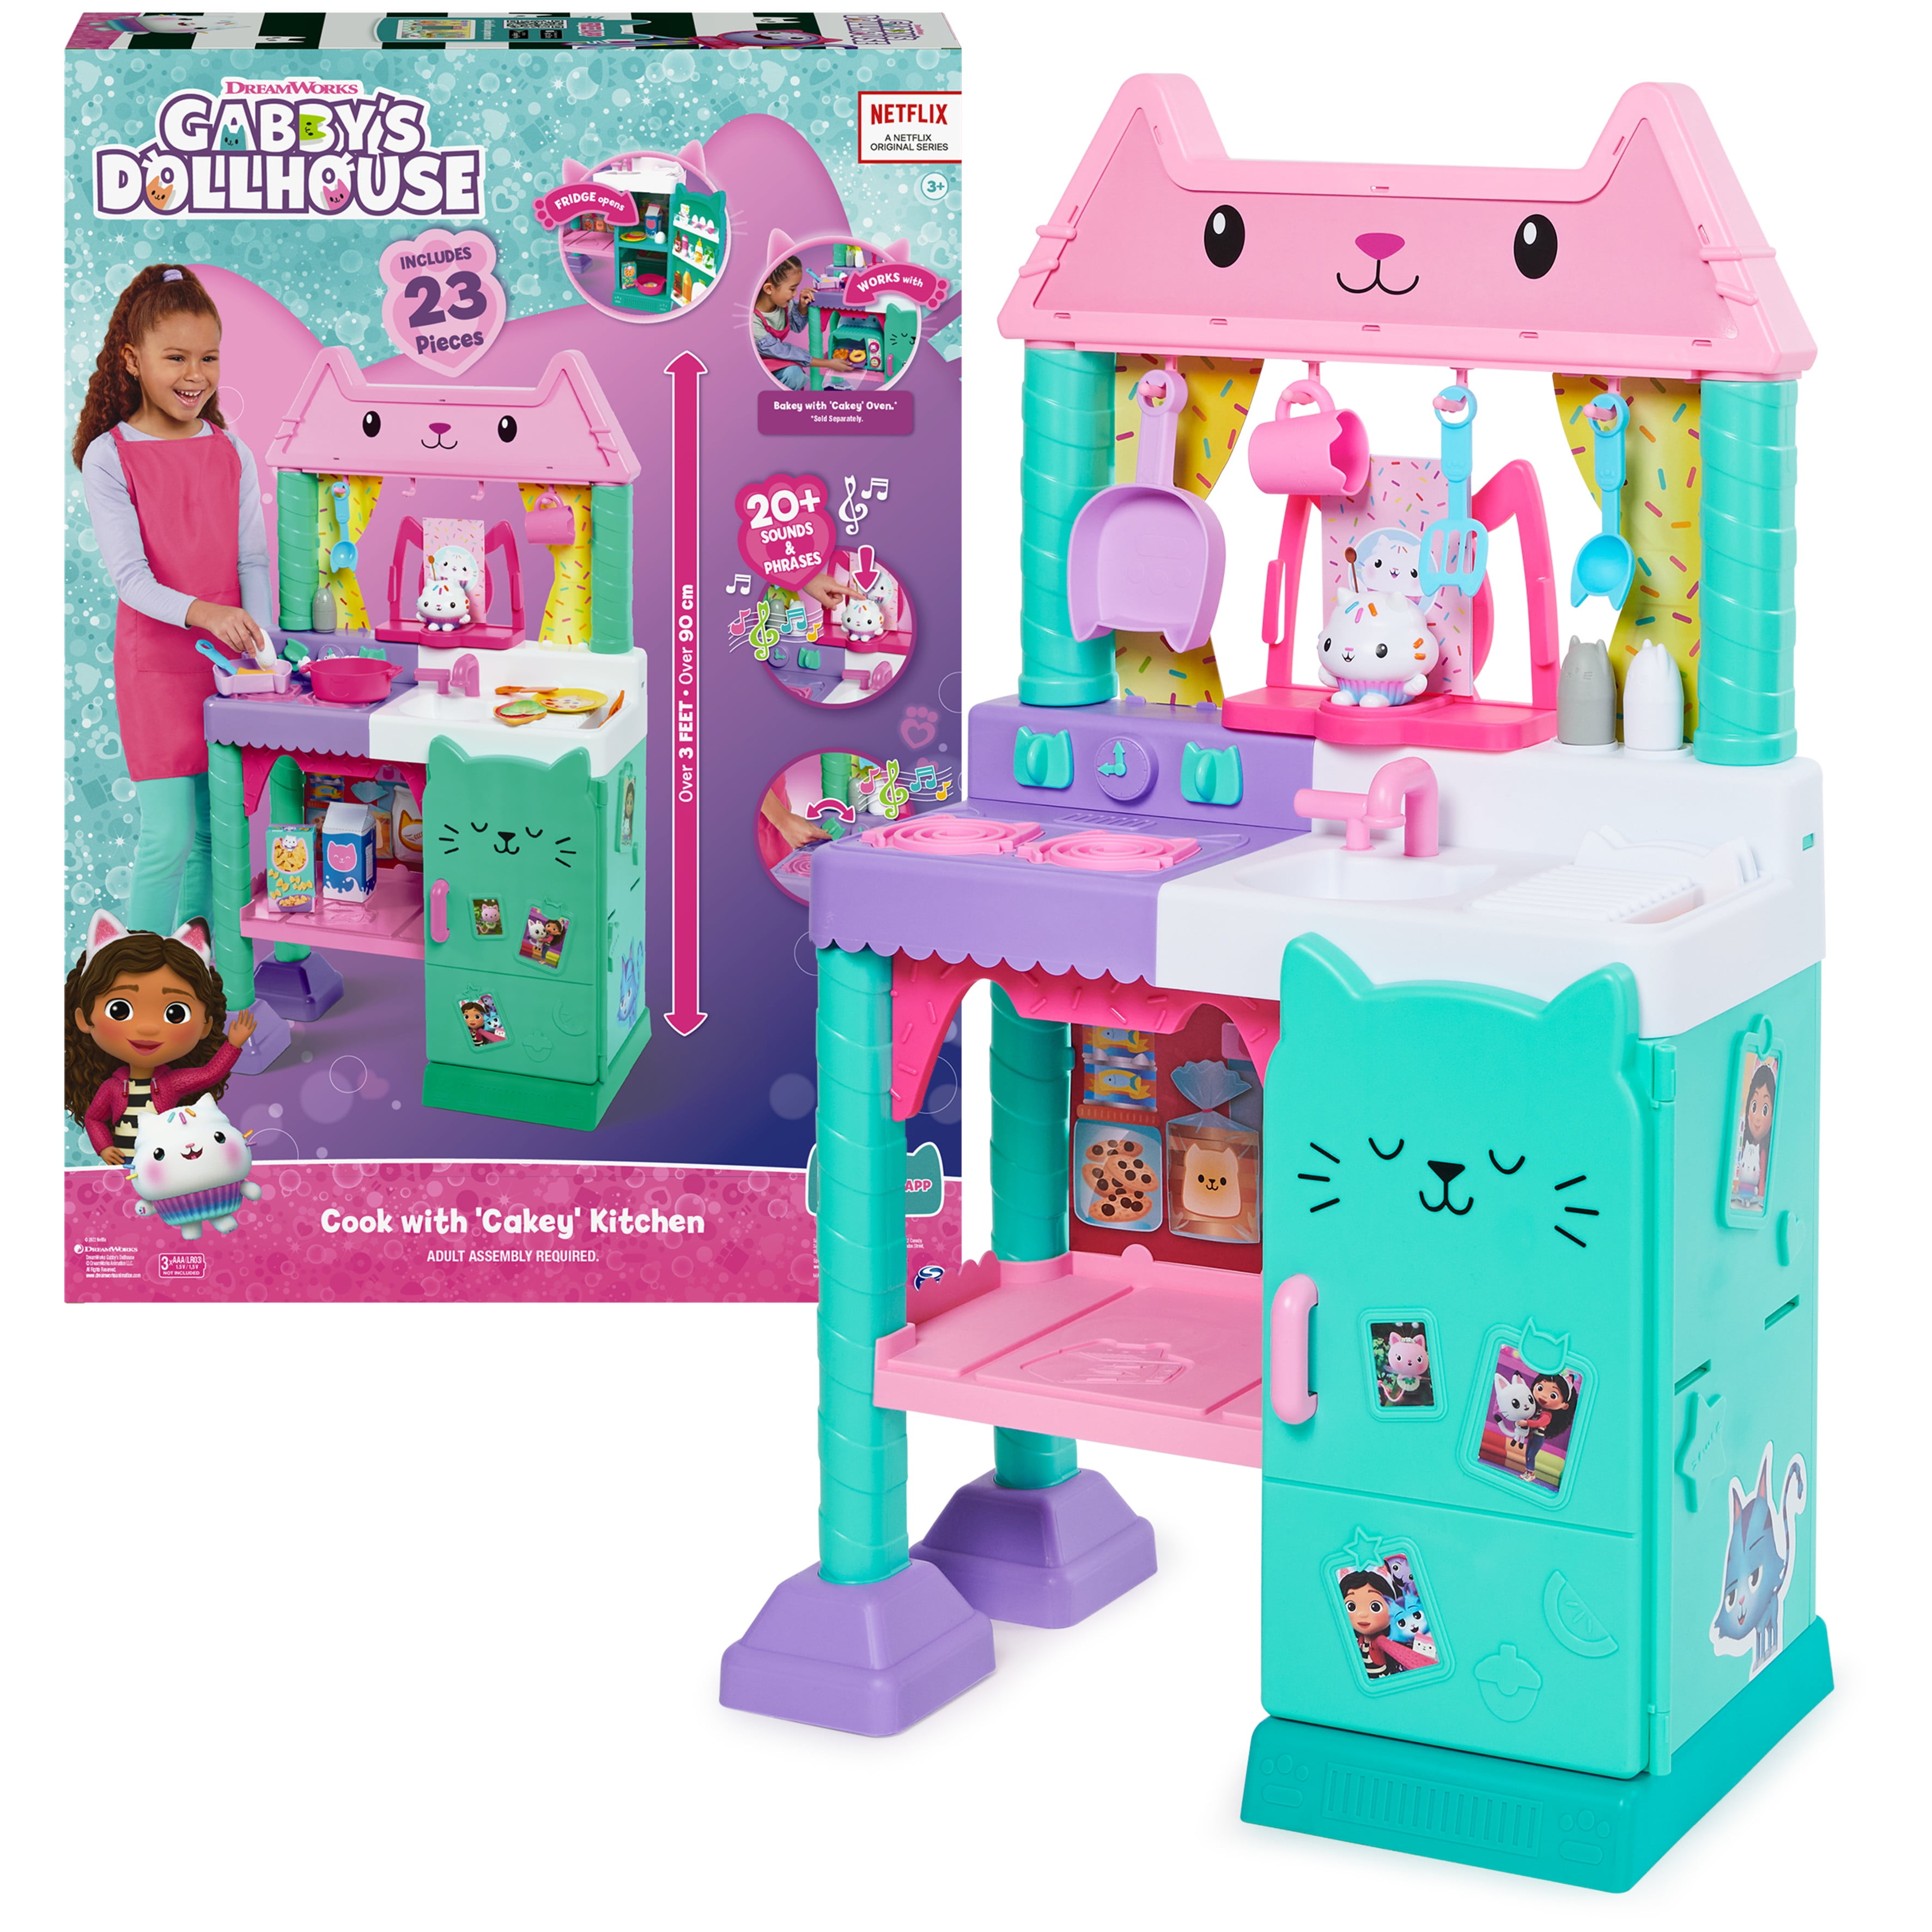 Gabbys Dollhouse, Cakey Play Kitchen Set, for Kids Ages 3 and Up